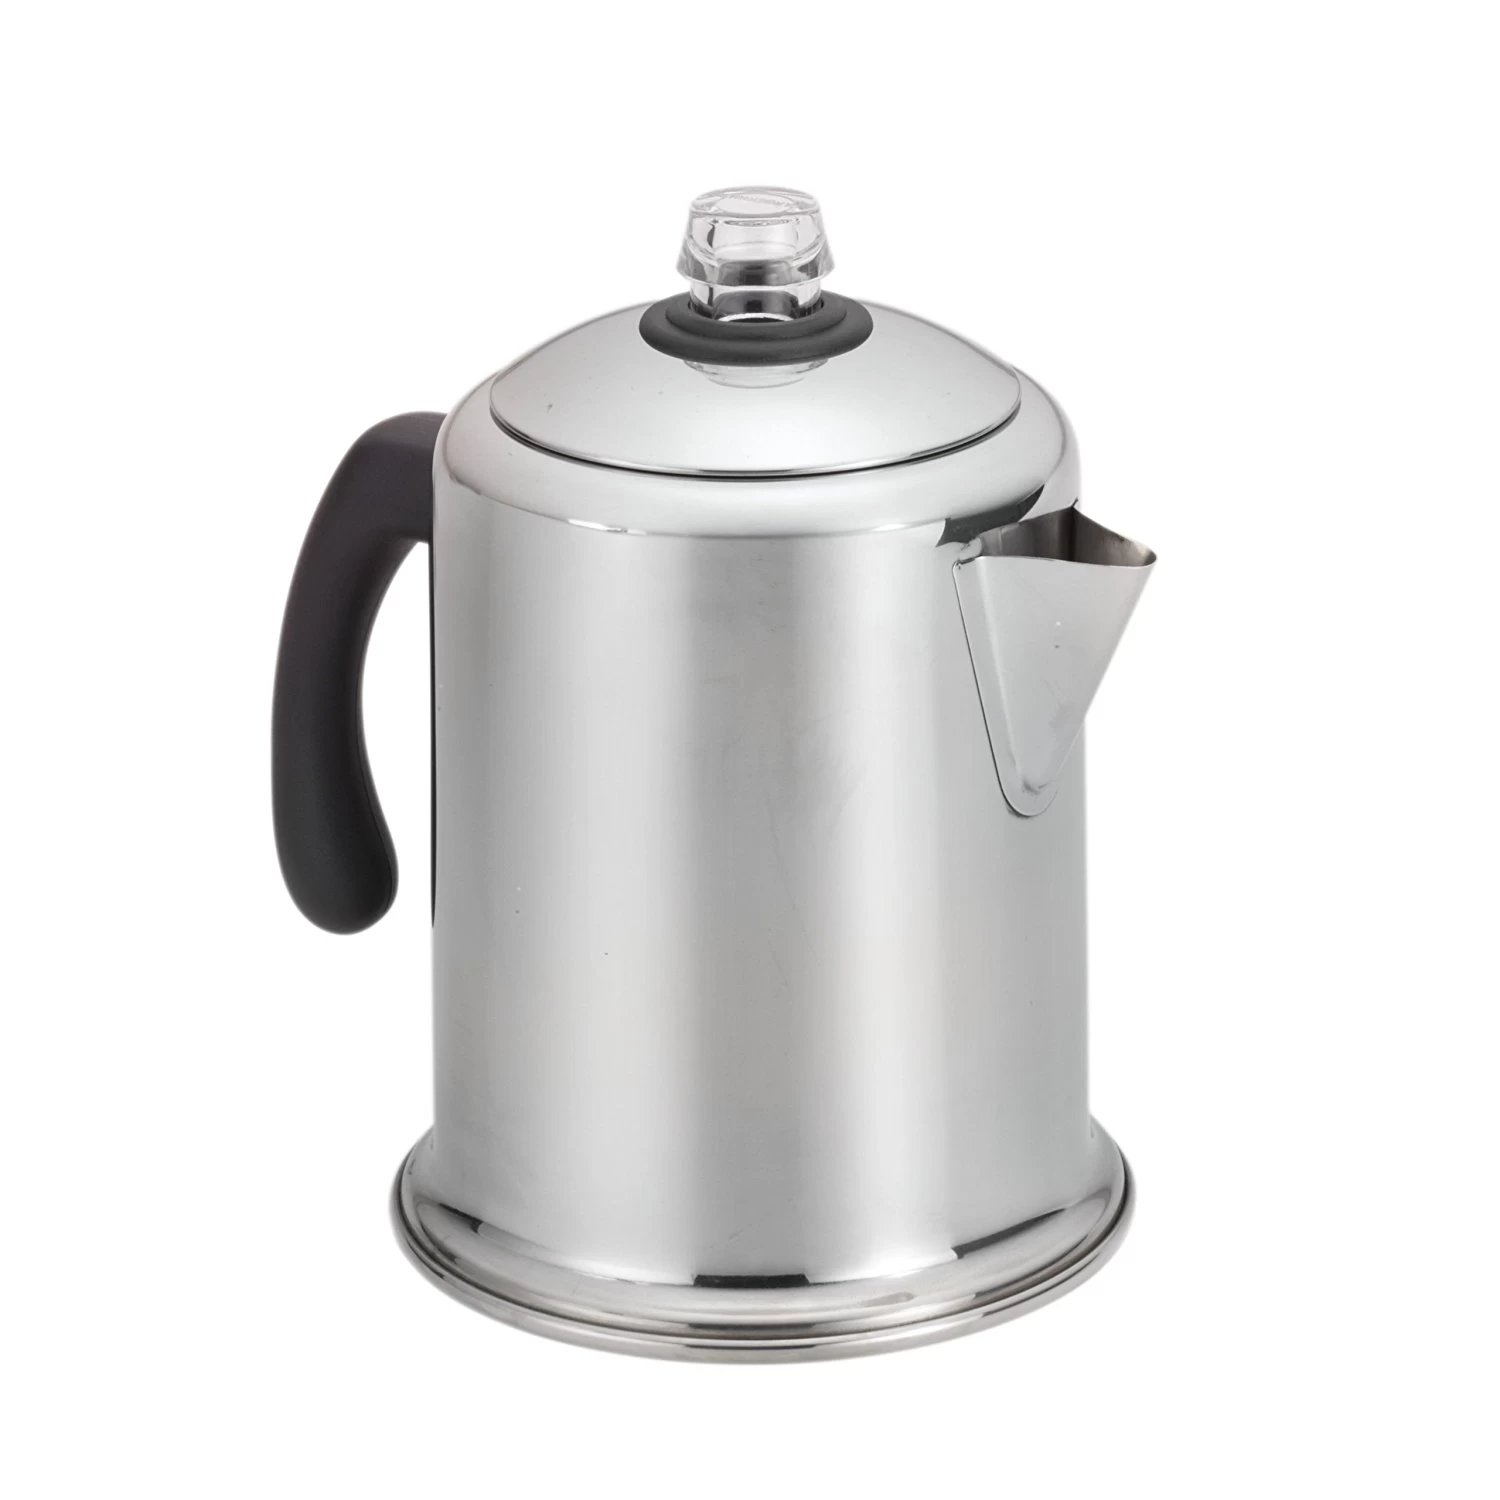 China Coffee pot company, rainbow coffee pot manufacturer china, China Stainless Steel Coffee Pot Factory